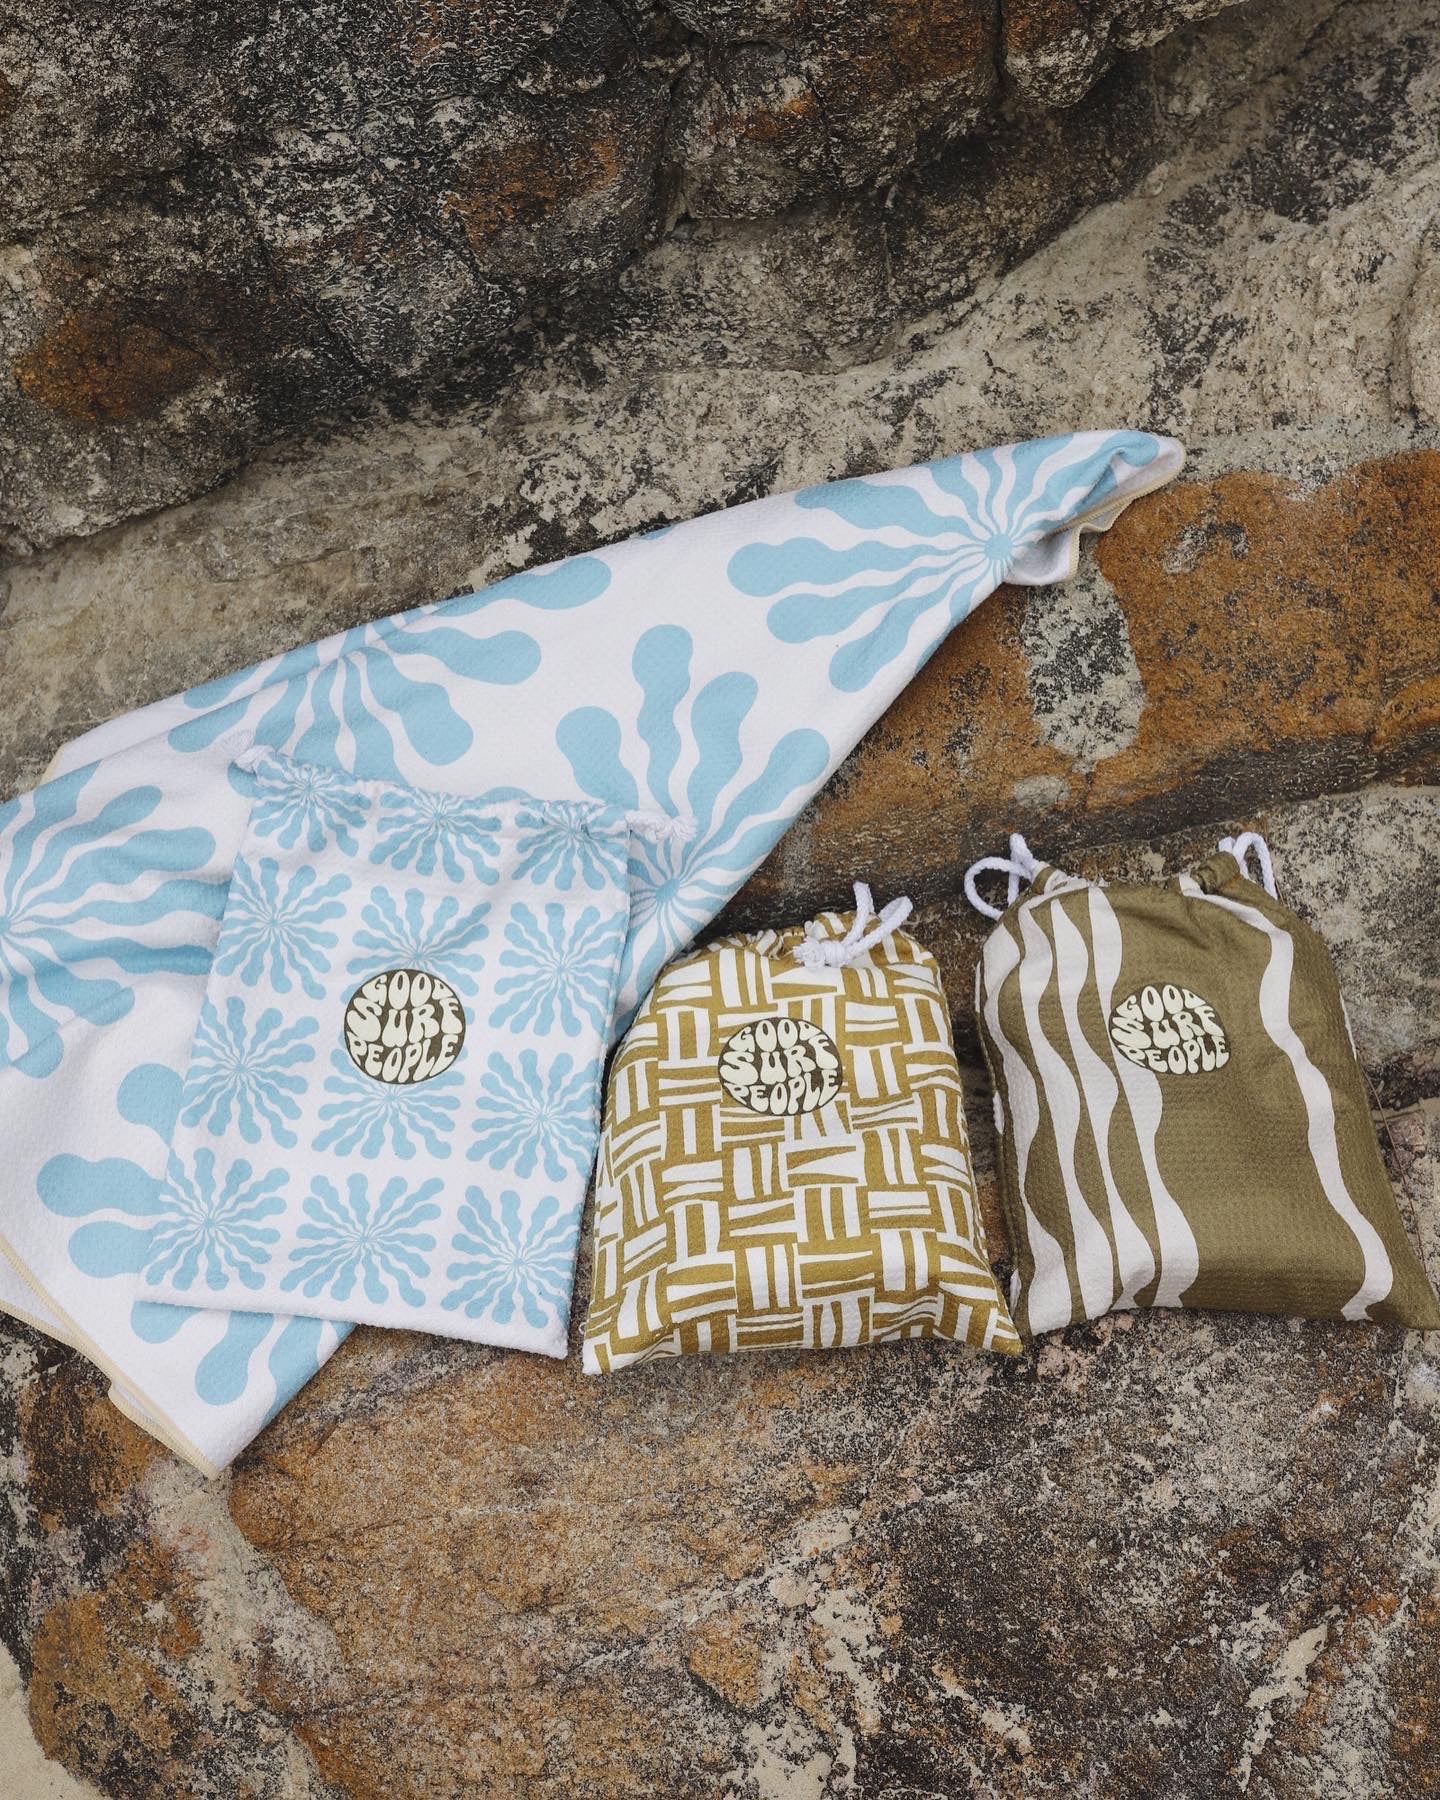 SAND FREE TOWEL COLLAB WITH GOOD SURF PEOPLE